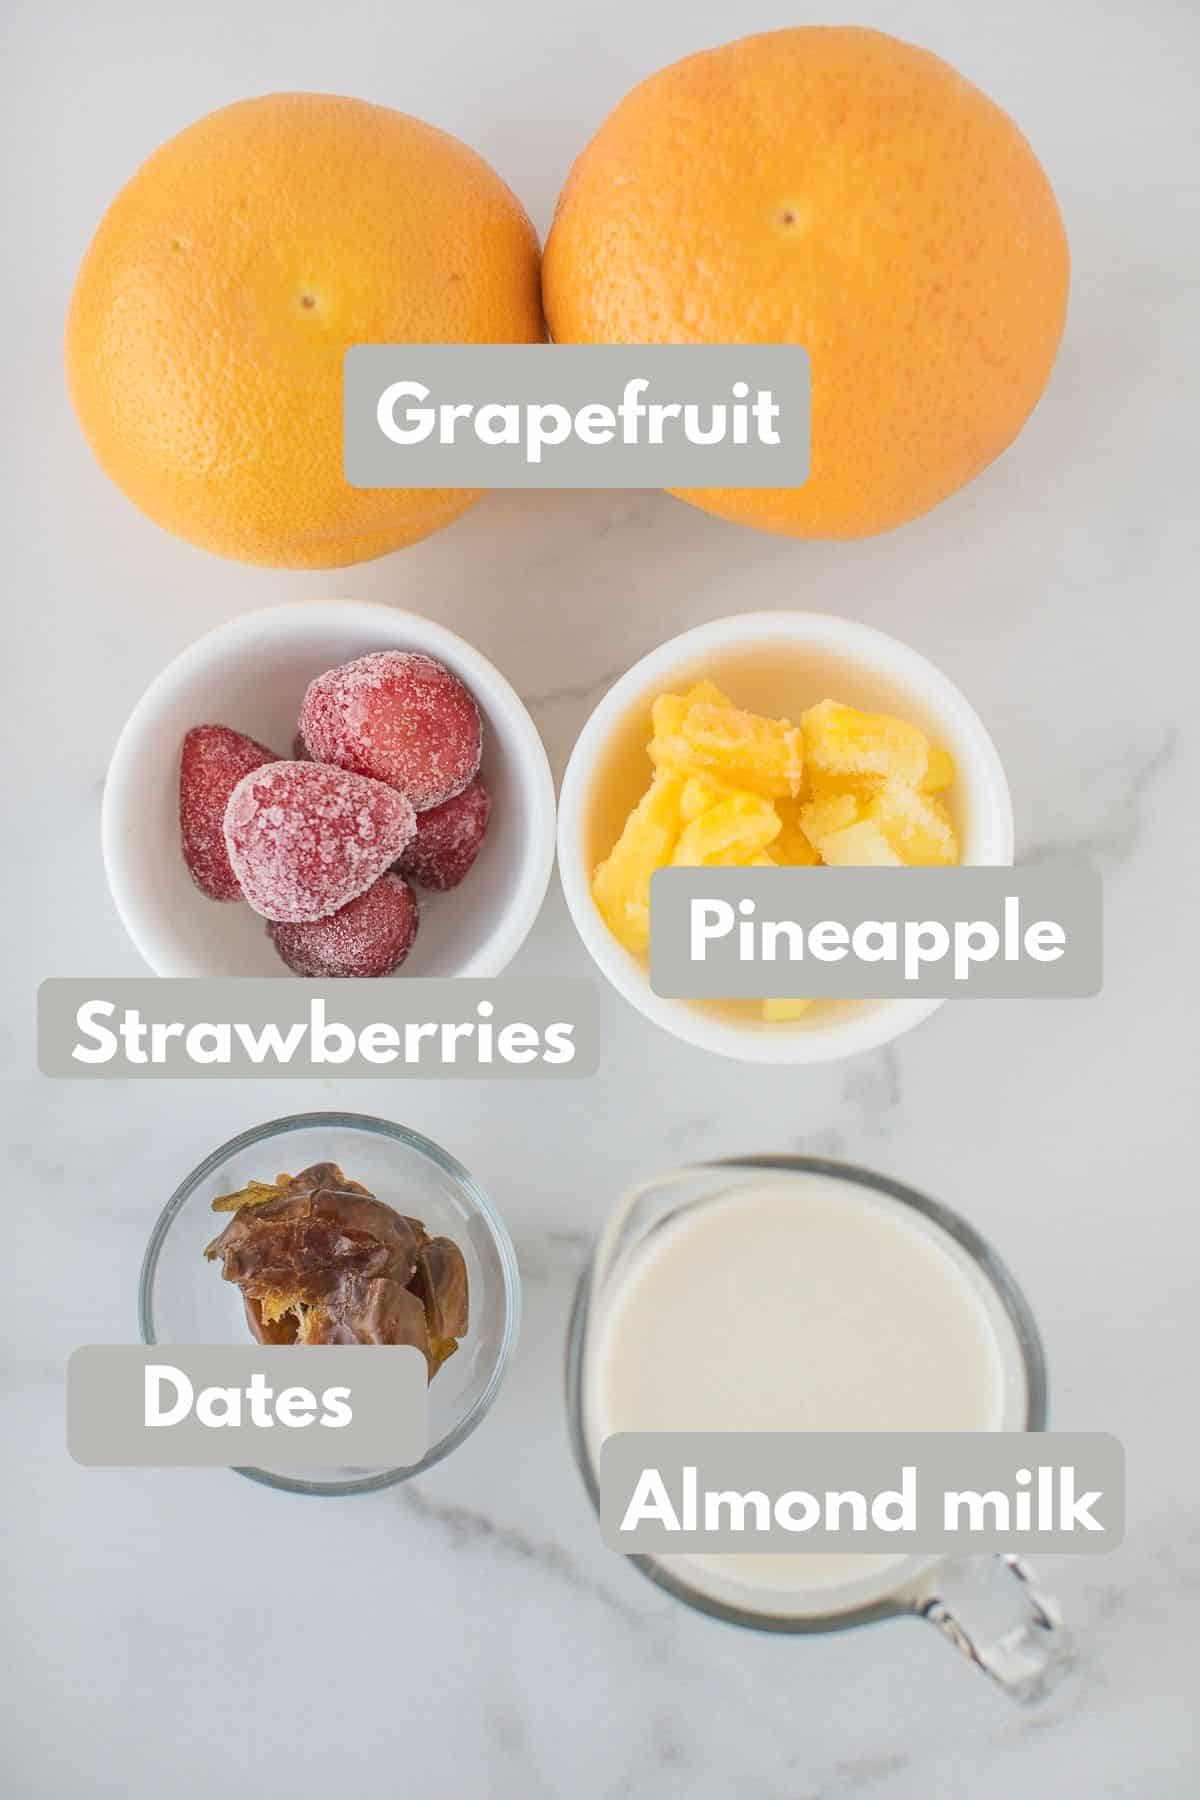 image of ingredients for grapefruit smoothie with labels